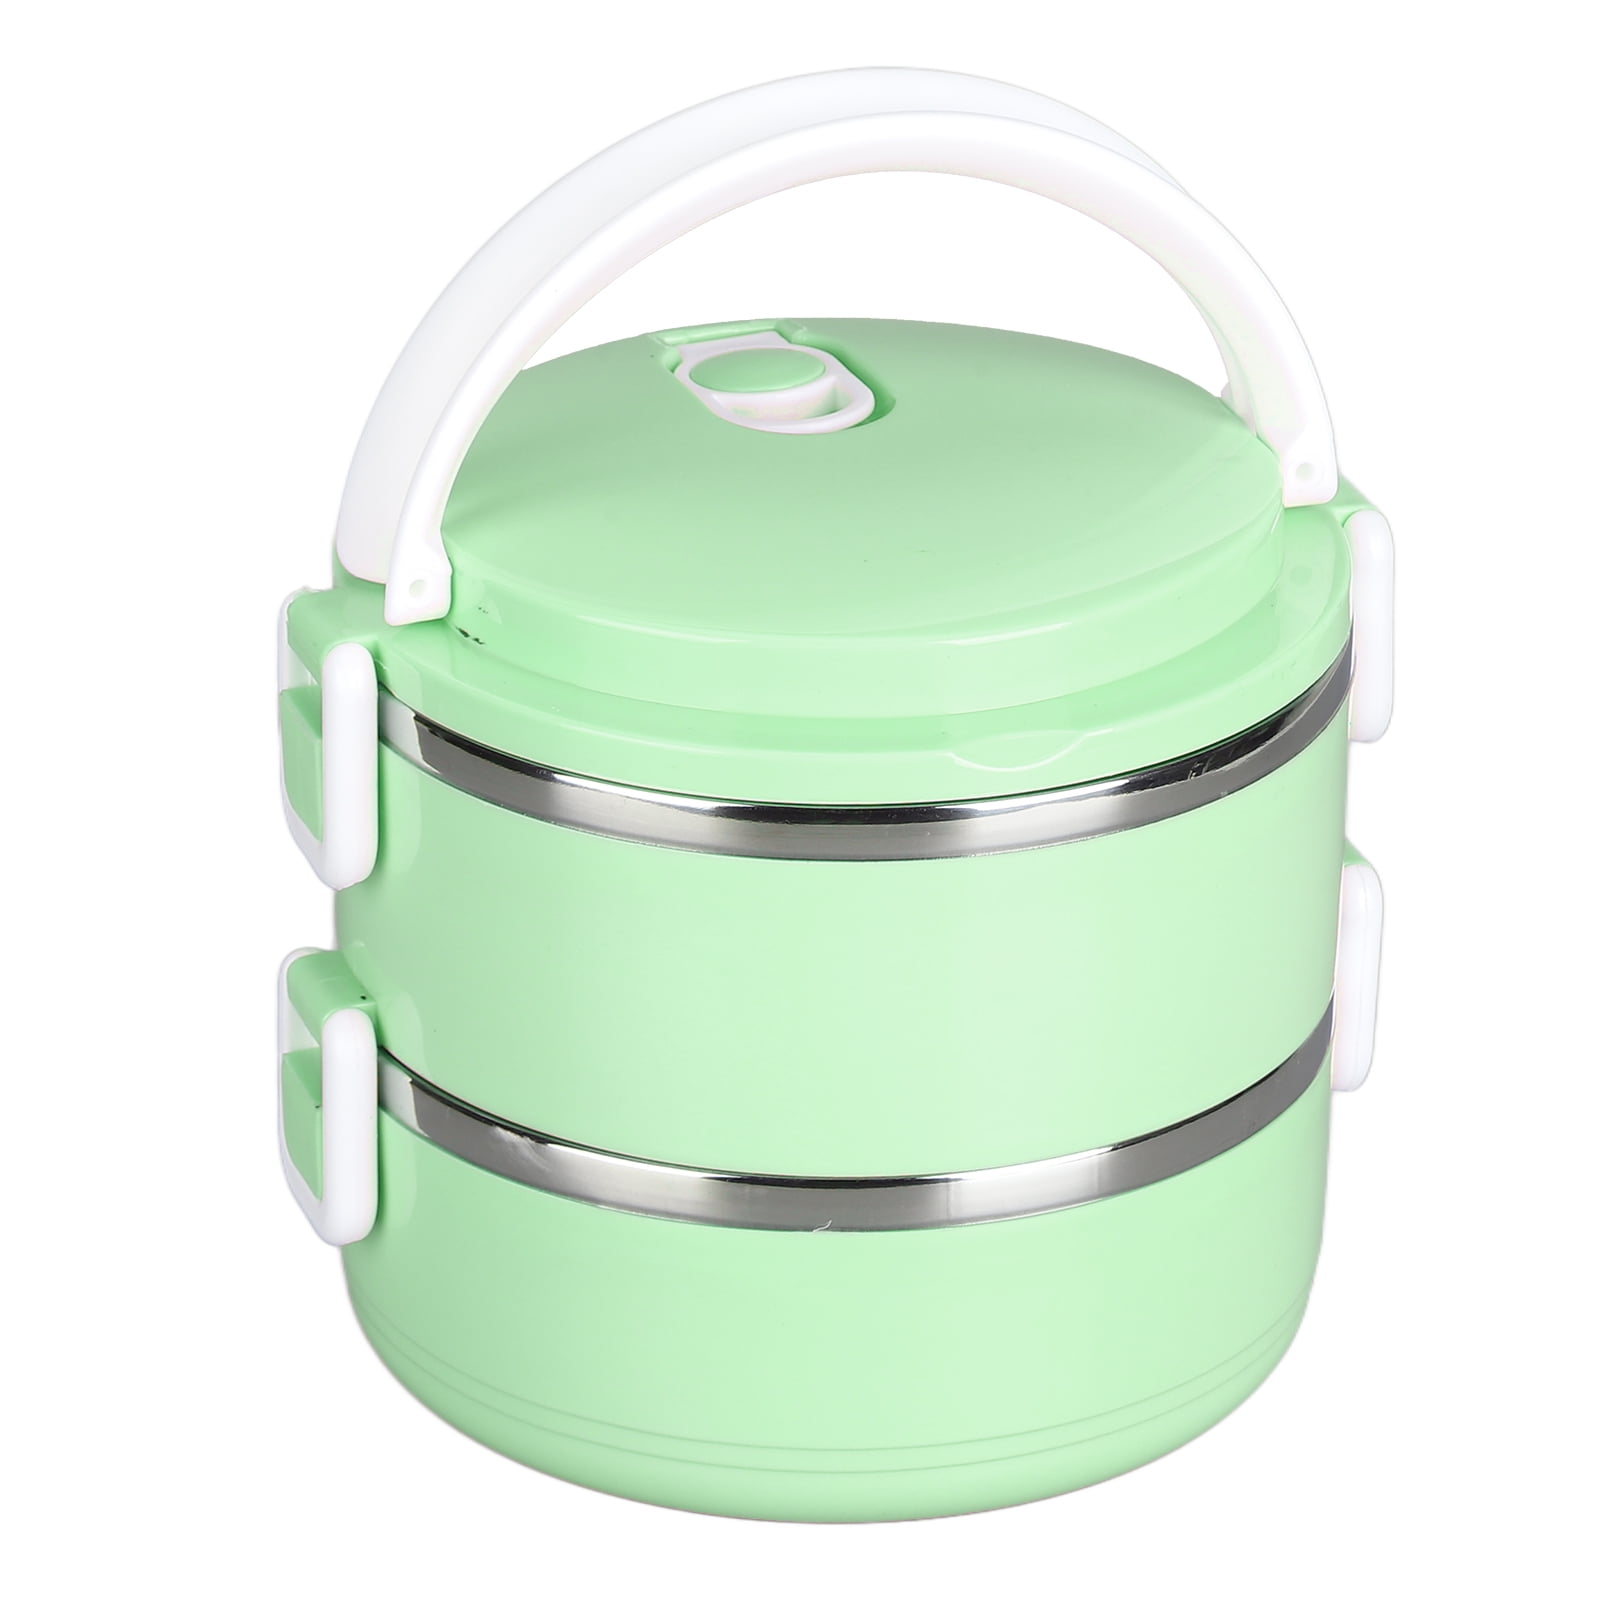 ANGGREK Thermal Lunch Box Stackable Hot Food Insulated Box 304 Stainless  Steel Round Lunchbox Sealed Food Containers,Stackable Thermal Lunch Box, Thermal Lunchbox 